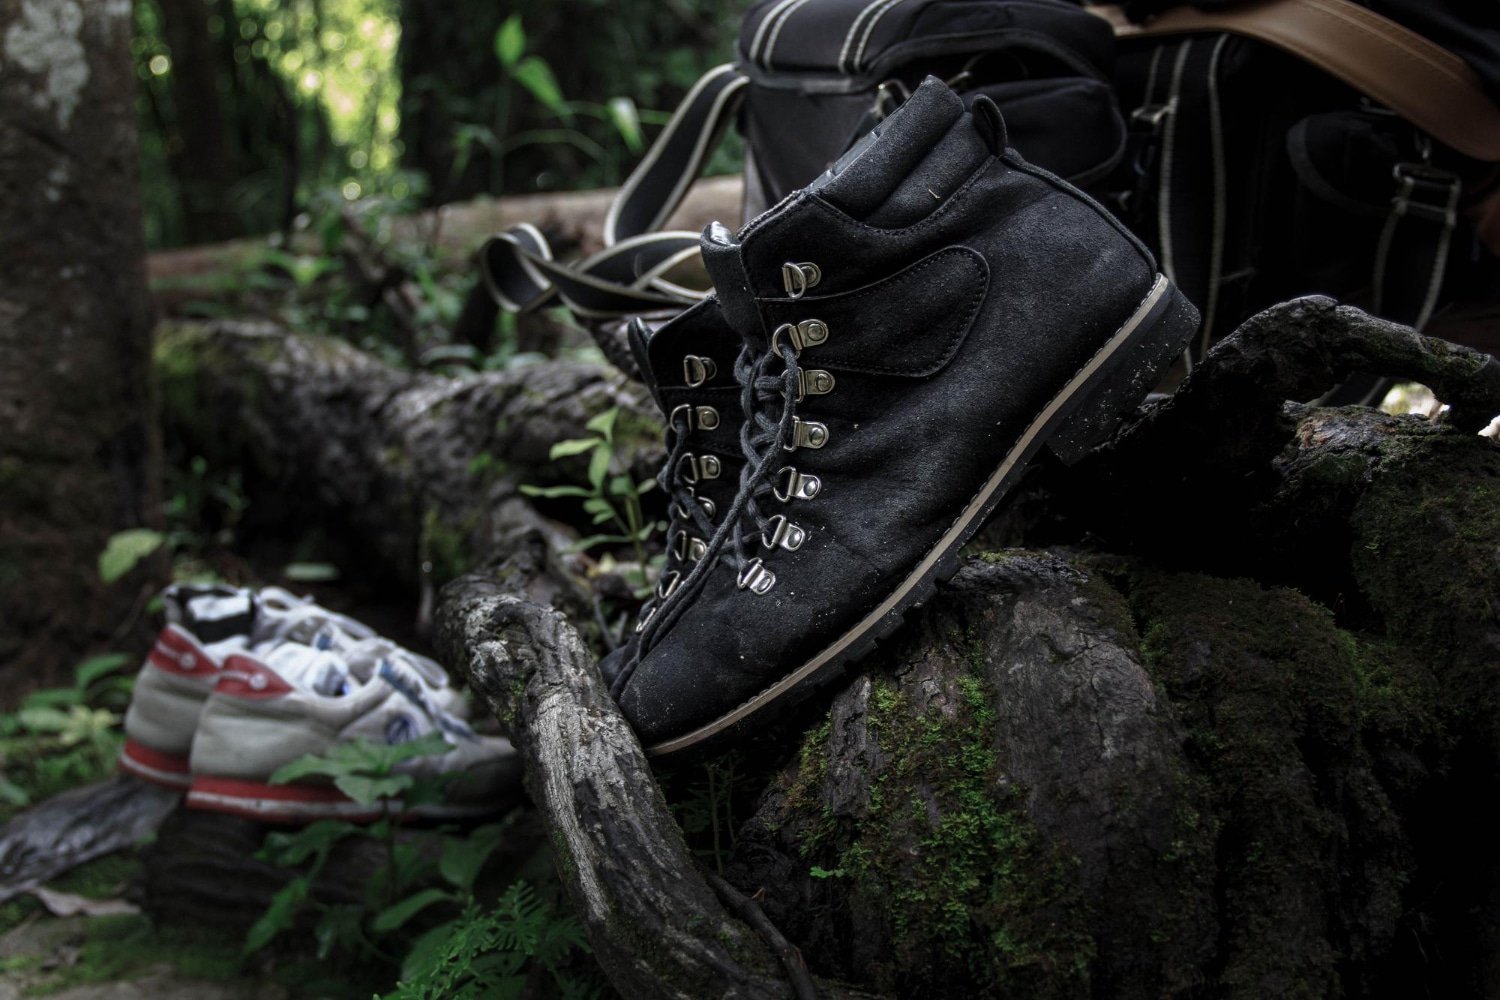 Hike Comfortably With Vasque Trail Footwear’s Durable Hiking Shoes